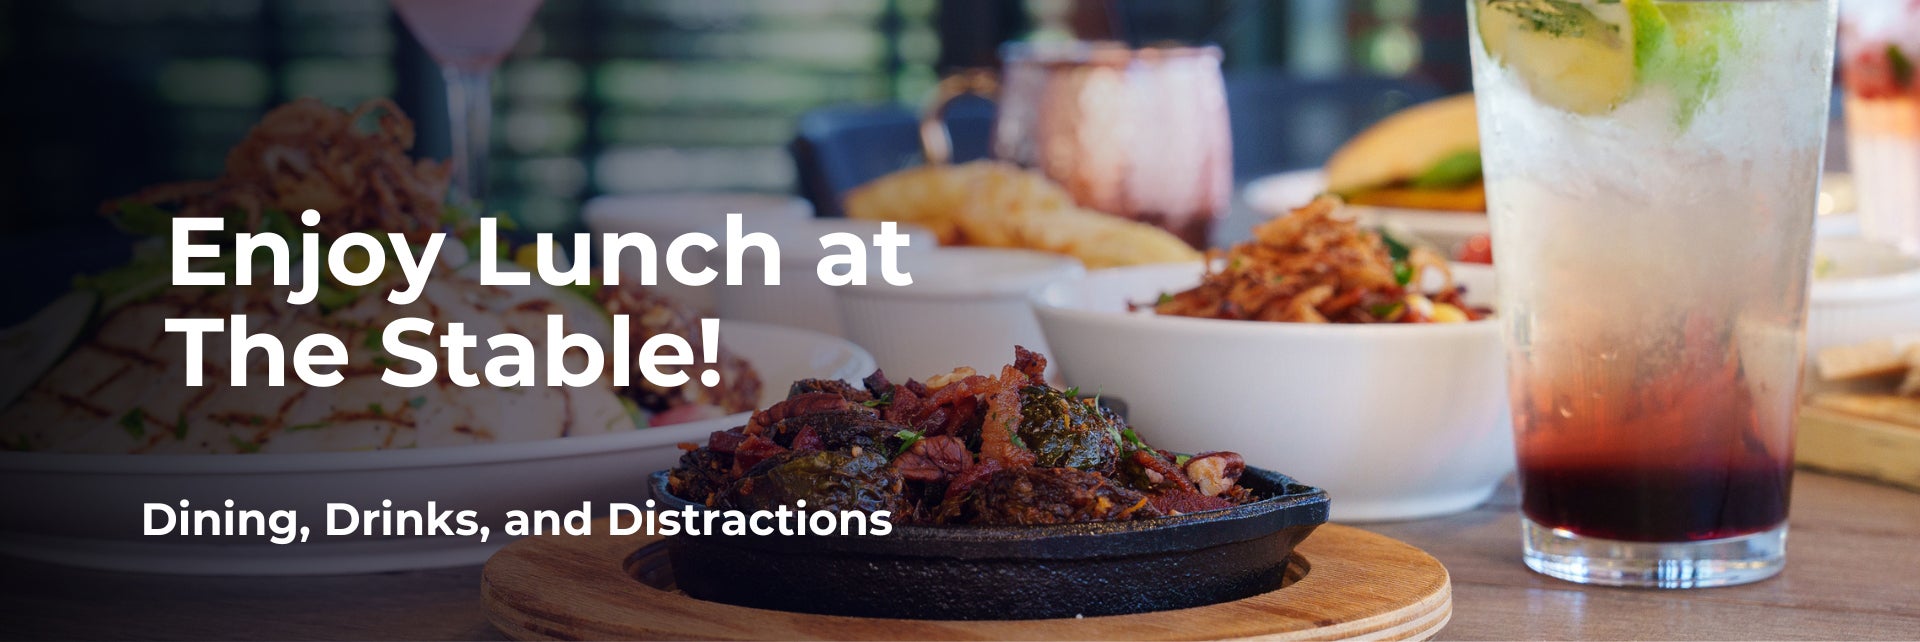 Enjoy Lunch at The Stable, Dining Drinks and Distractions